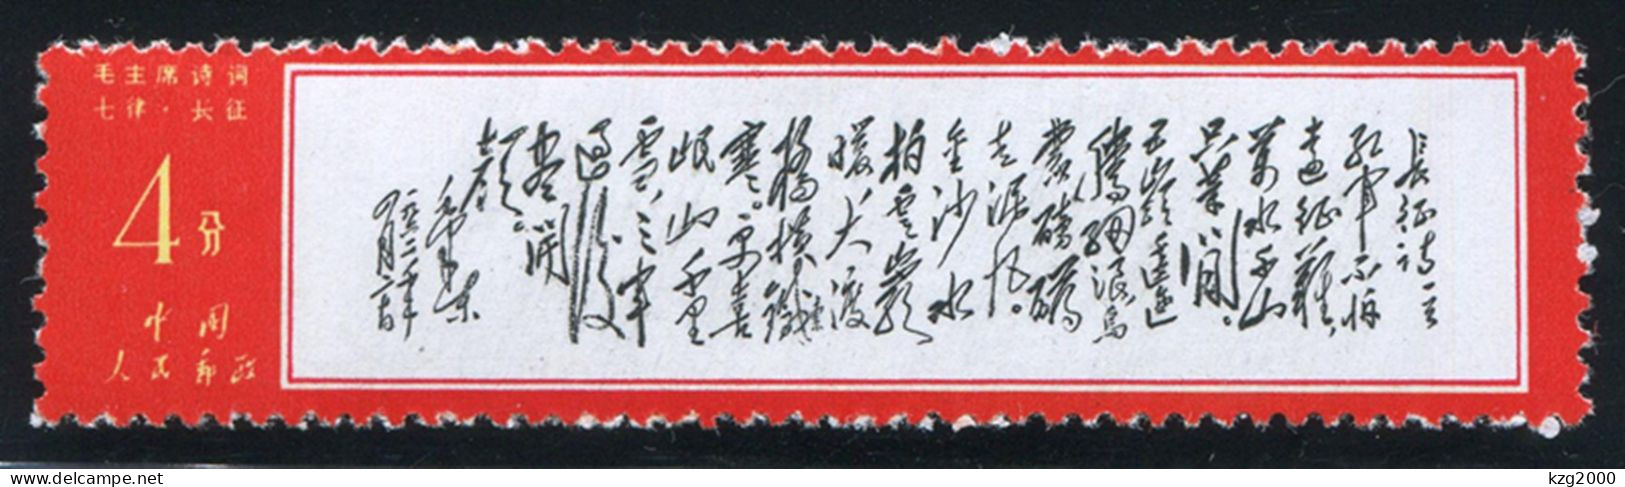 China Stamp 1967 W7 Chairman Mao Poem Stamps 4C ( Chang Zheng  ) OG - Unused Stamps